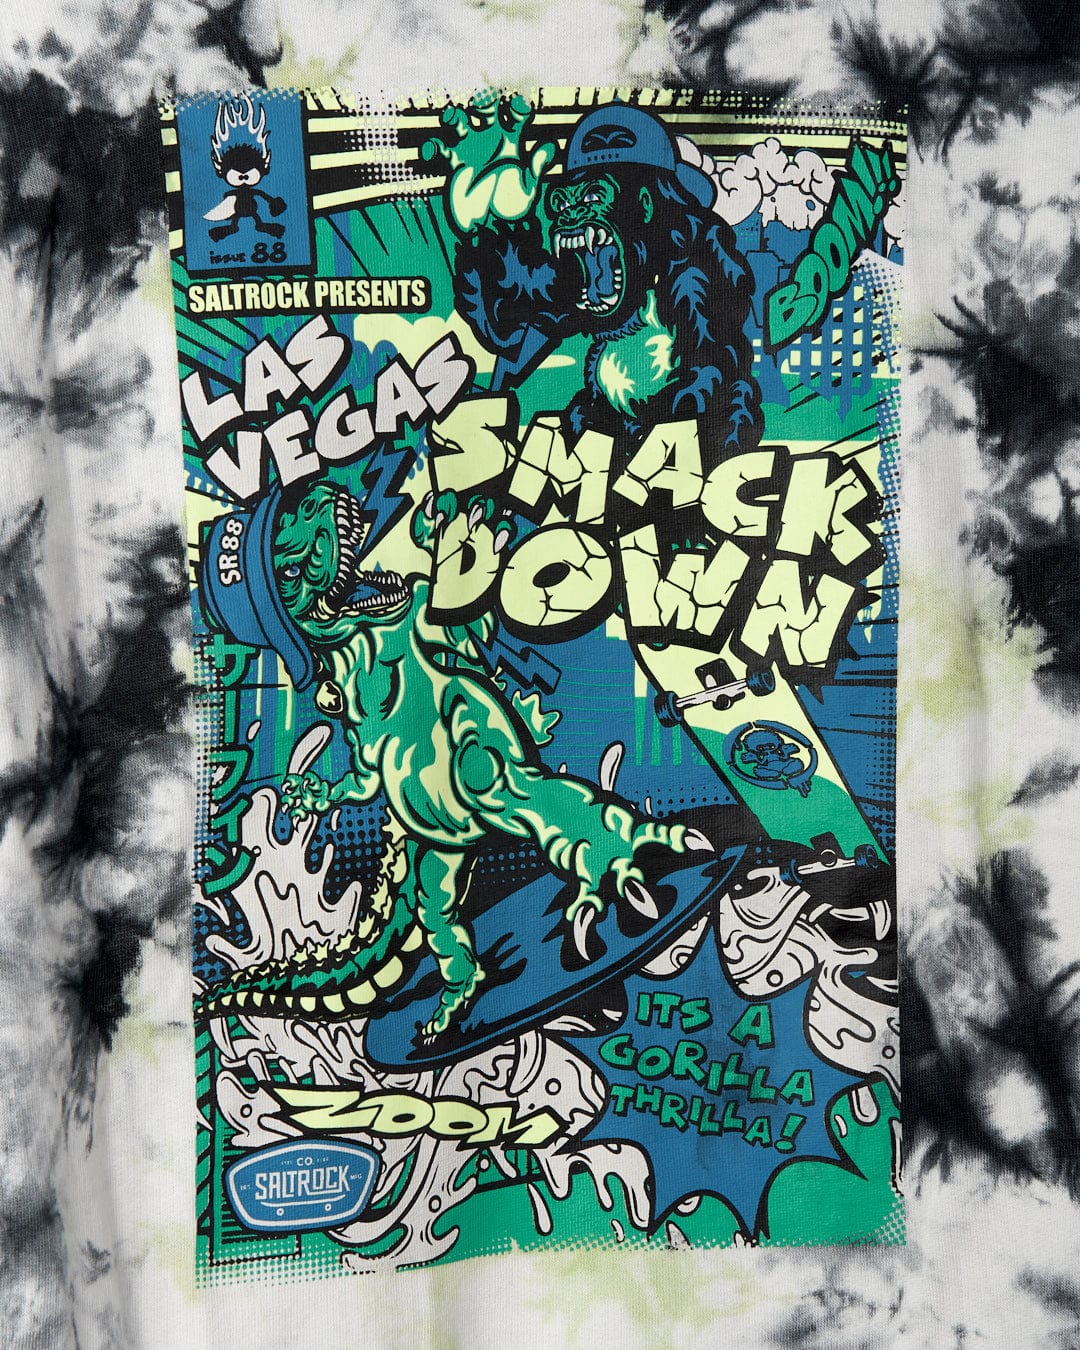 Las Vegas Smackdown - Kids Glow in the Dark Oversized Pop Hoodie - Multi featuring a cartoon gorilla and dinosaur fighting with comic-style text saying "Las Vegas Smack Down" and "It's a Gorilla Thrilla!" by Saltrock. The design has vibrant blue and green colors and includes glow in the dark graphics for an extra punch.